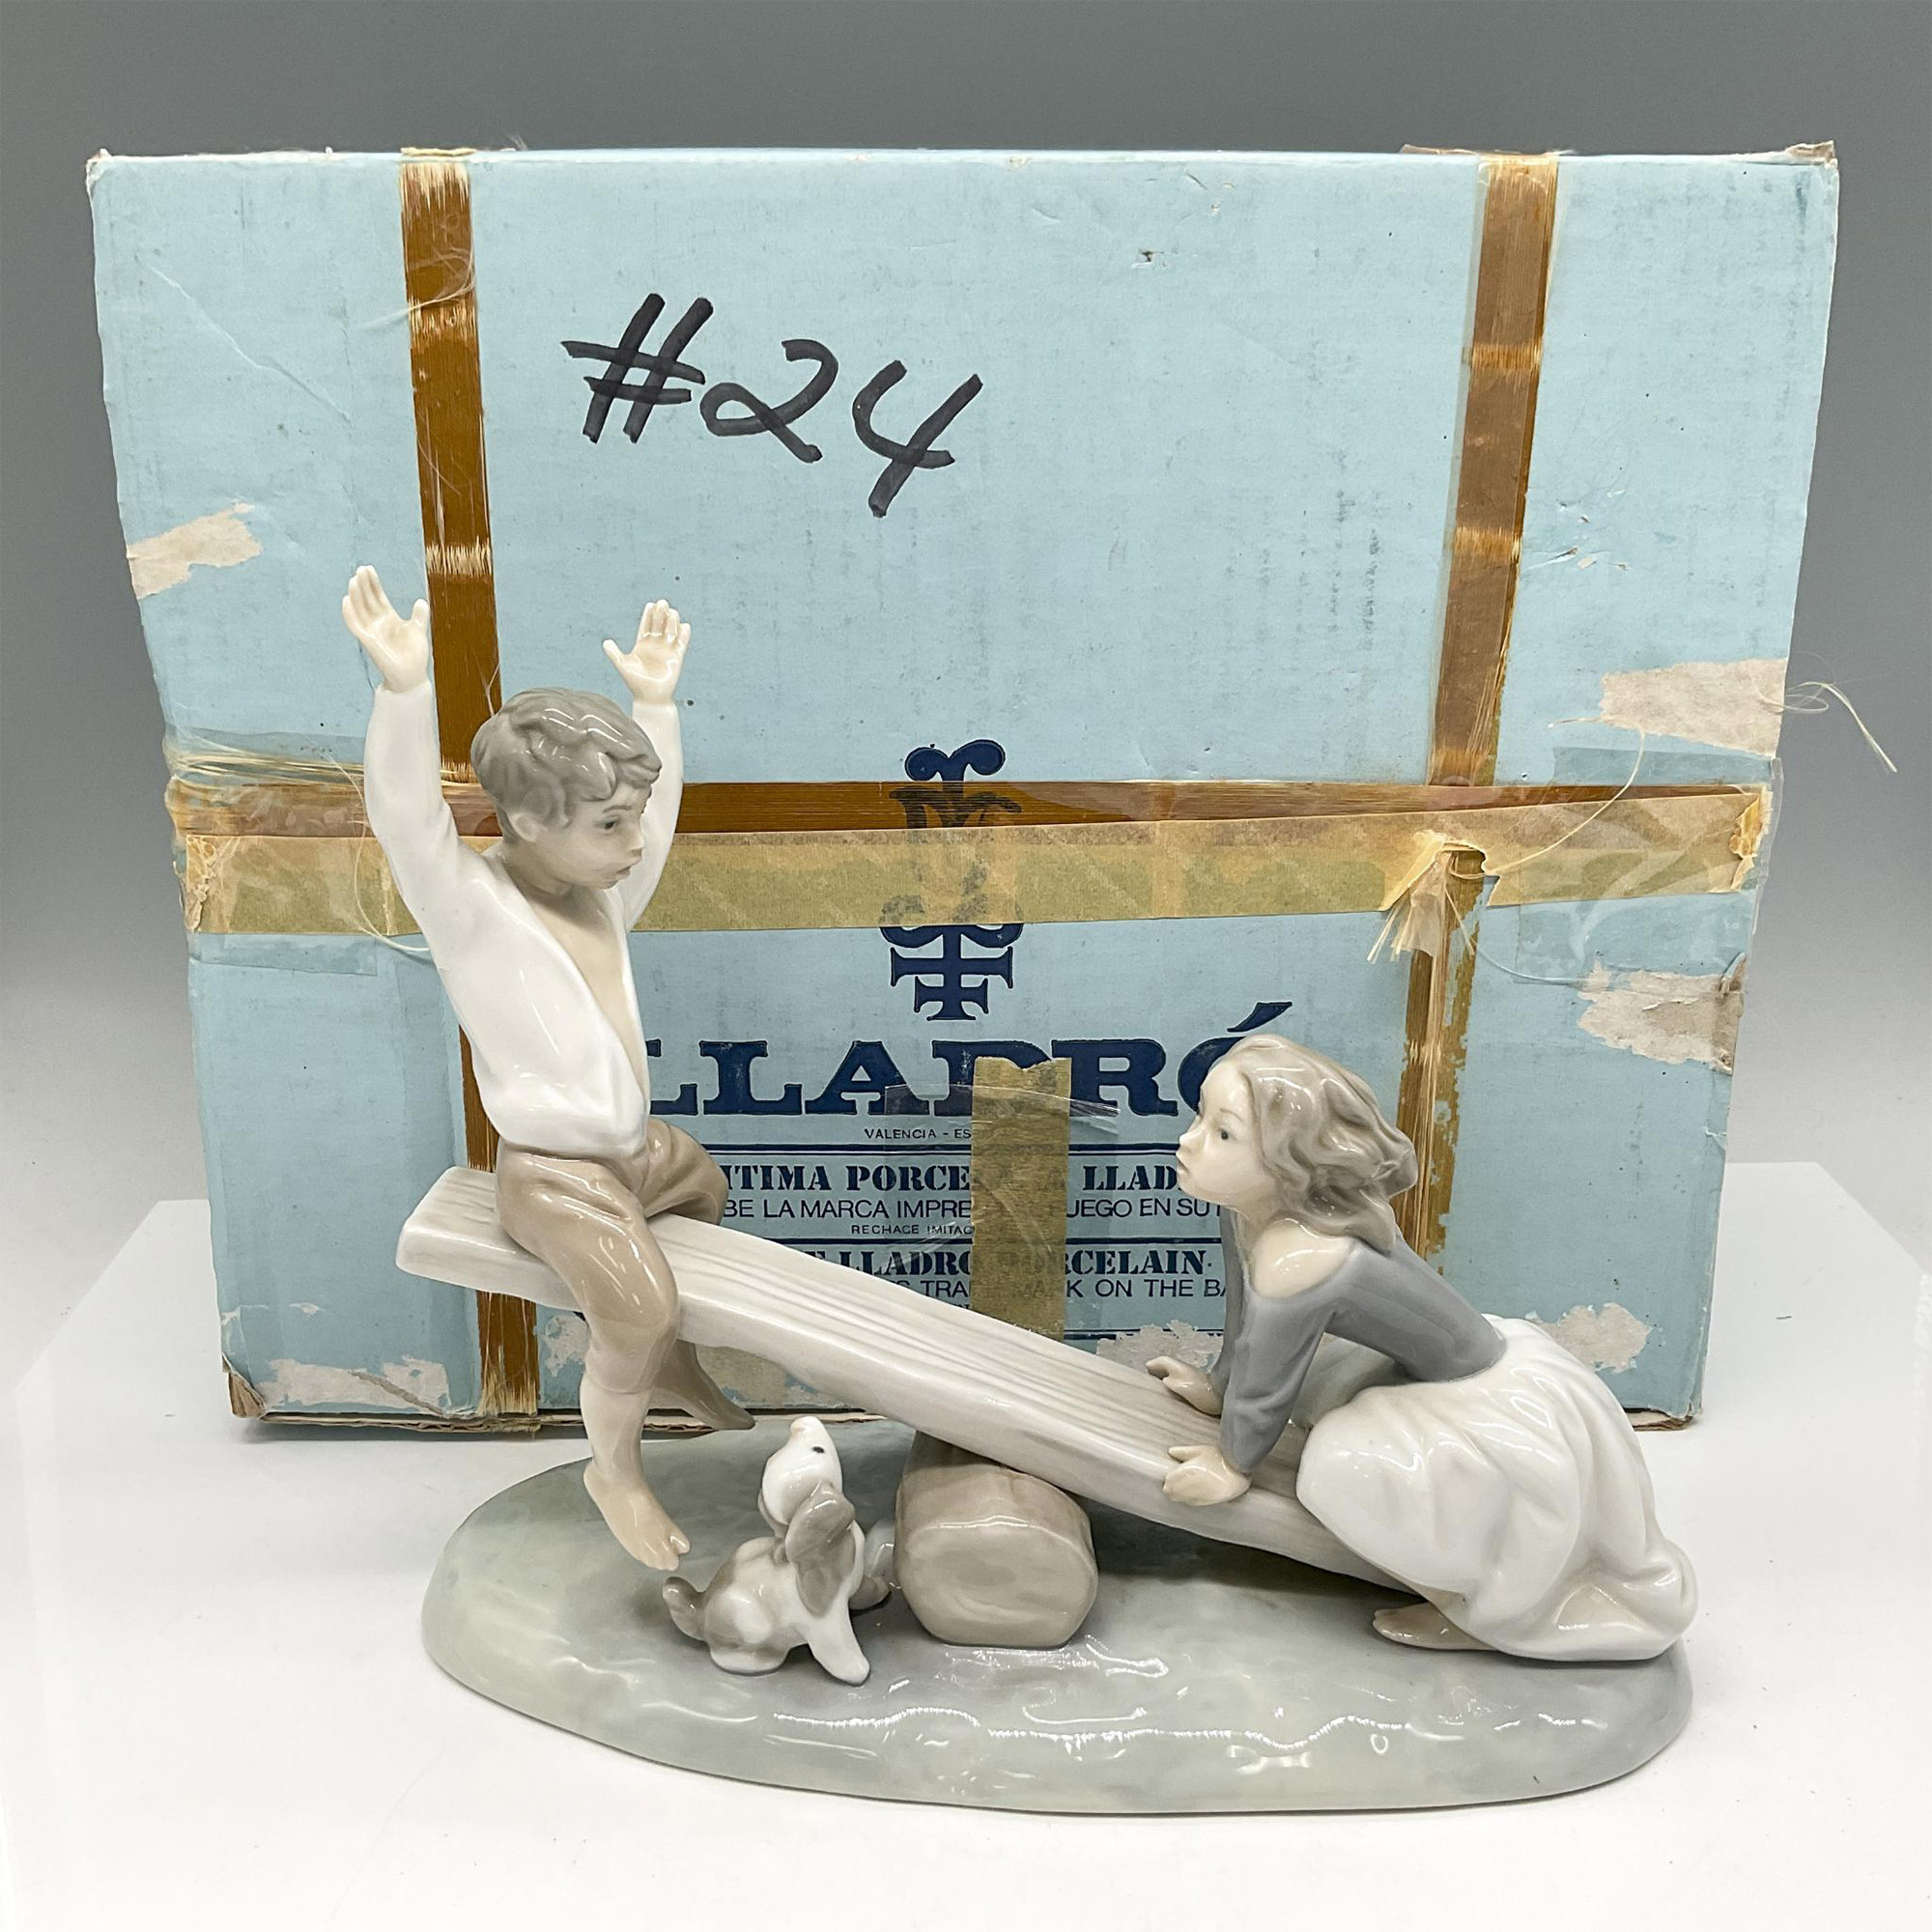 See-Saw 1004867 - Lladro Porcelain Figurine - Image 4 of 4